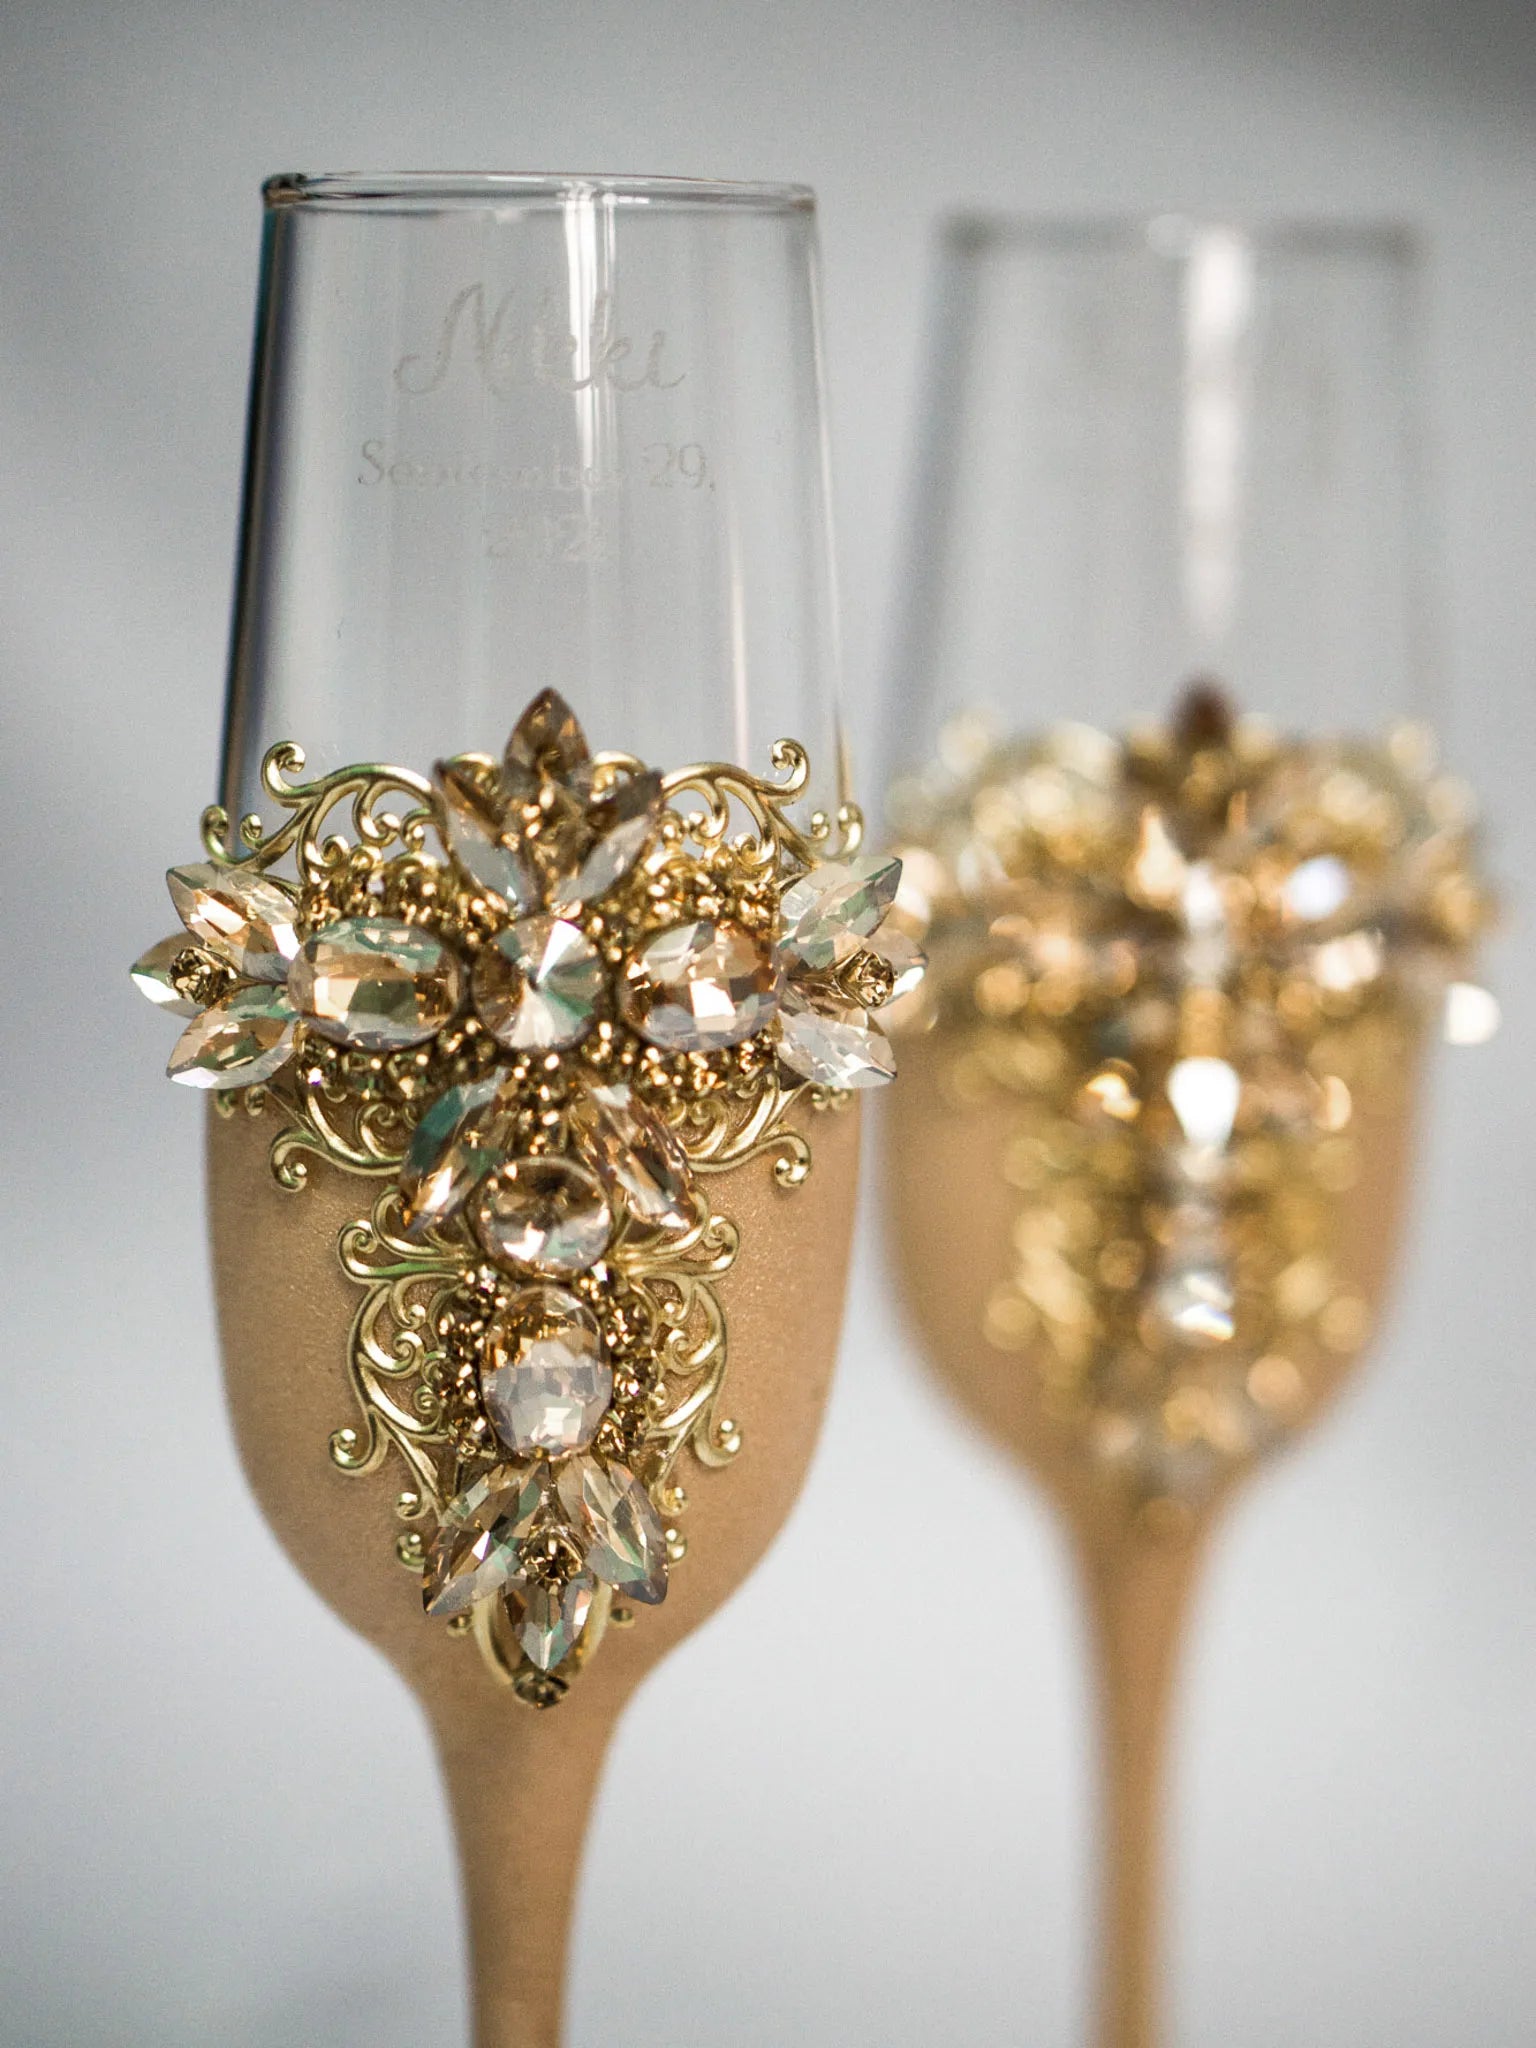 Exquisite gold stemware for toasts